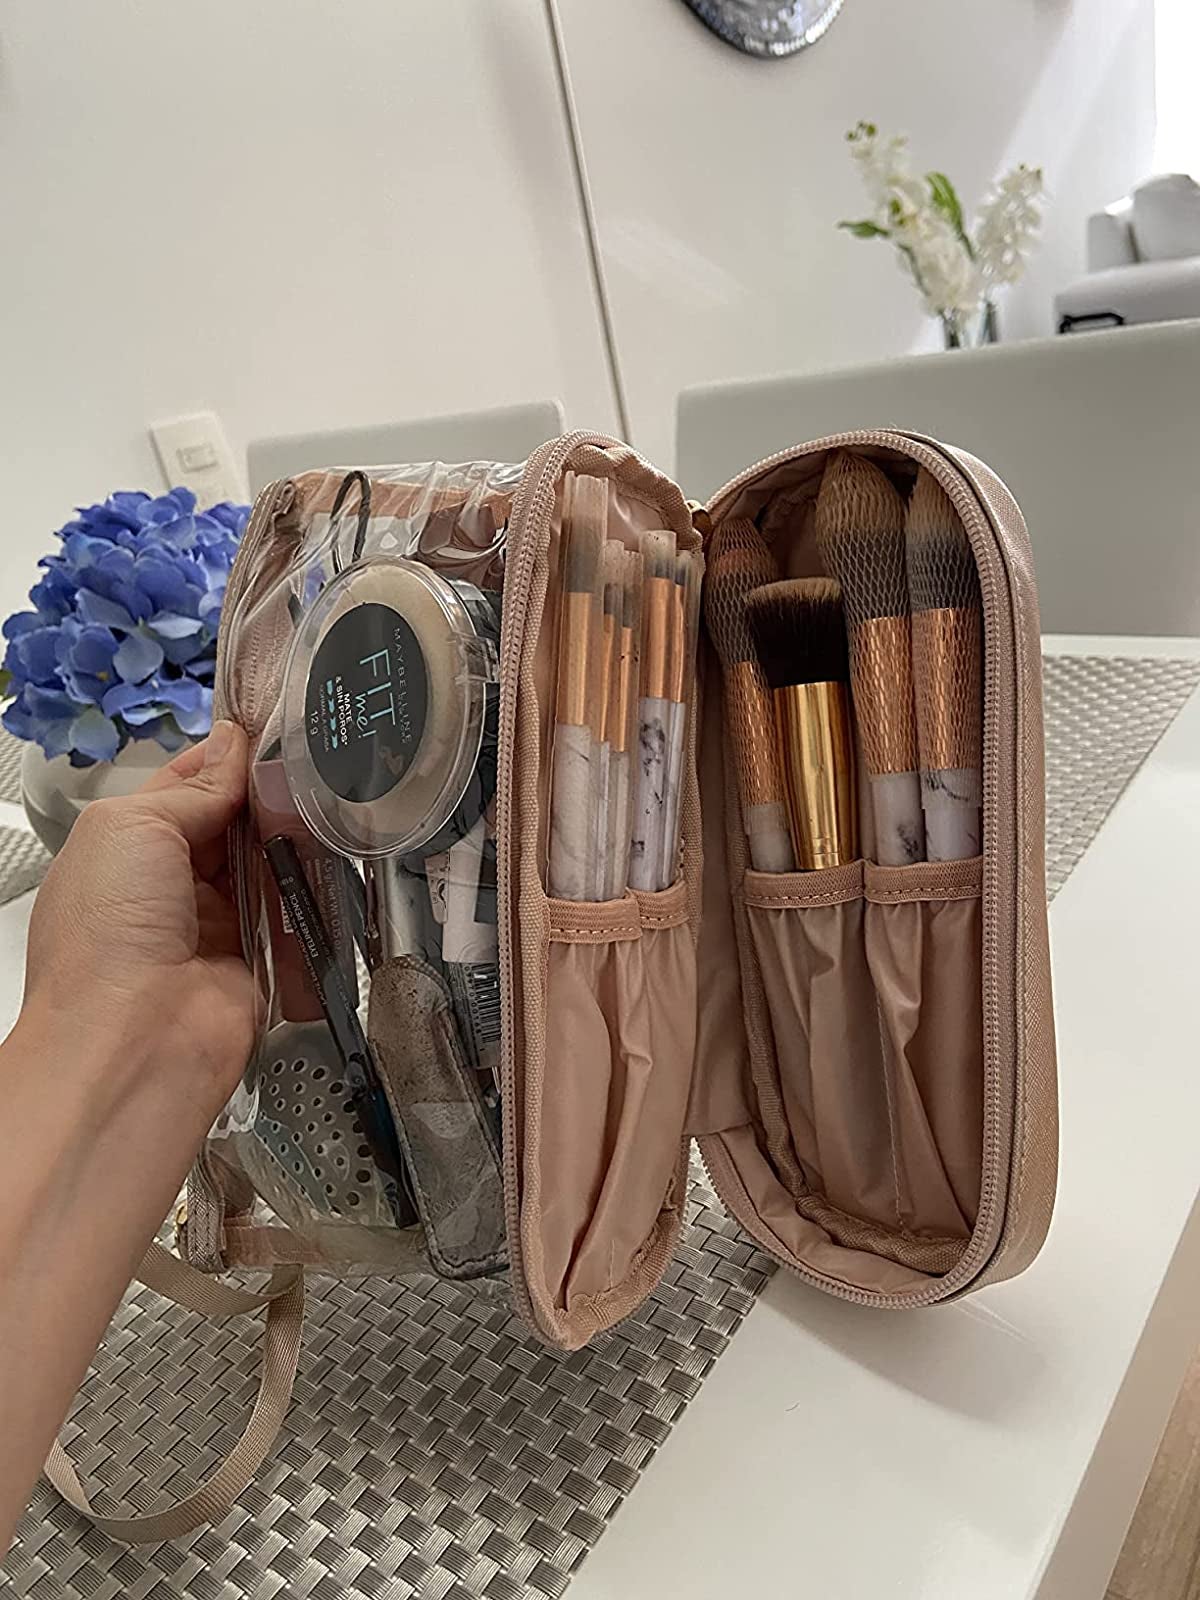 makeup bag with compartments